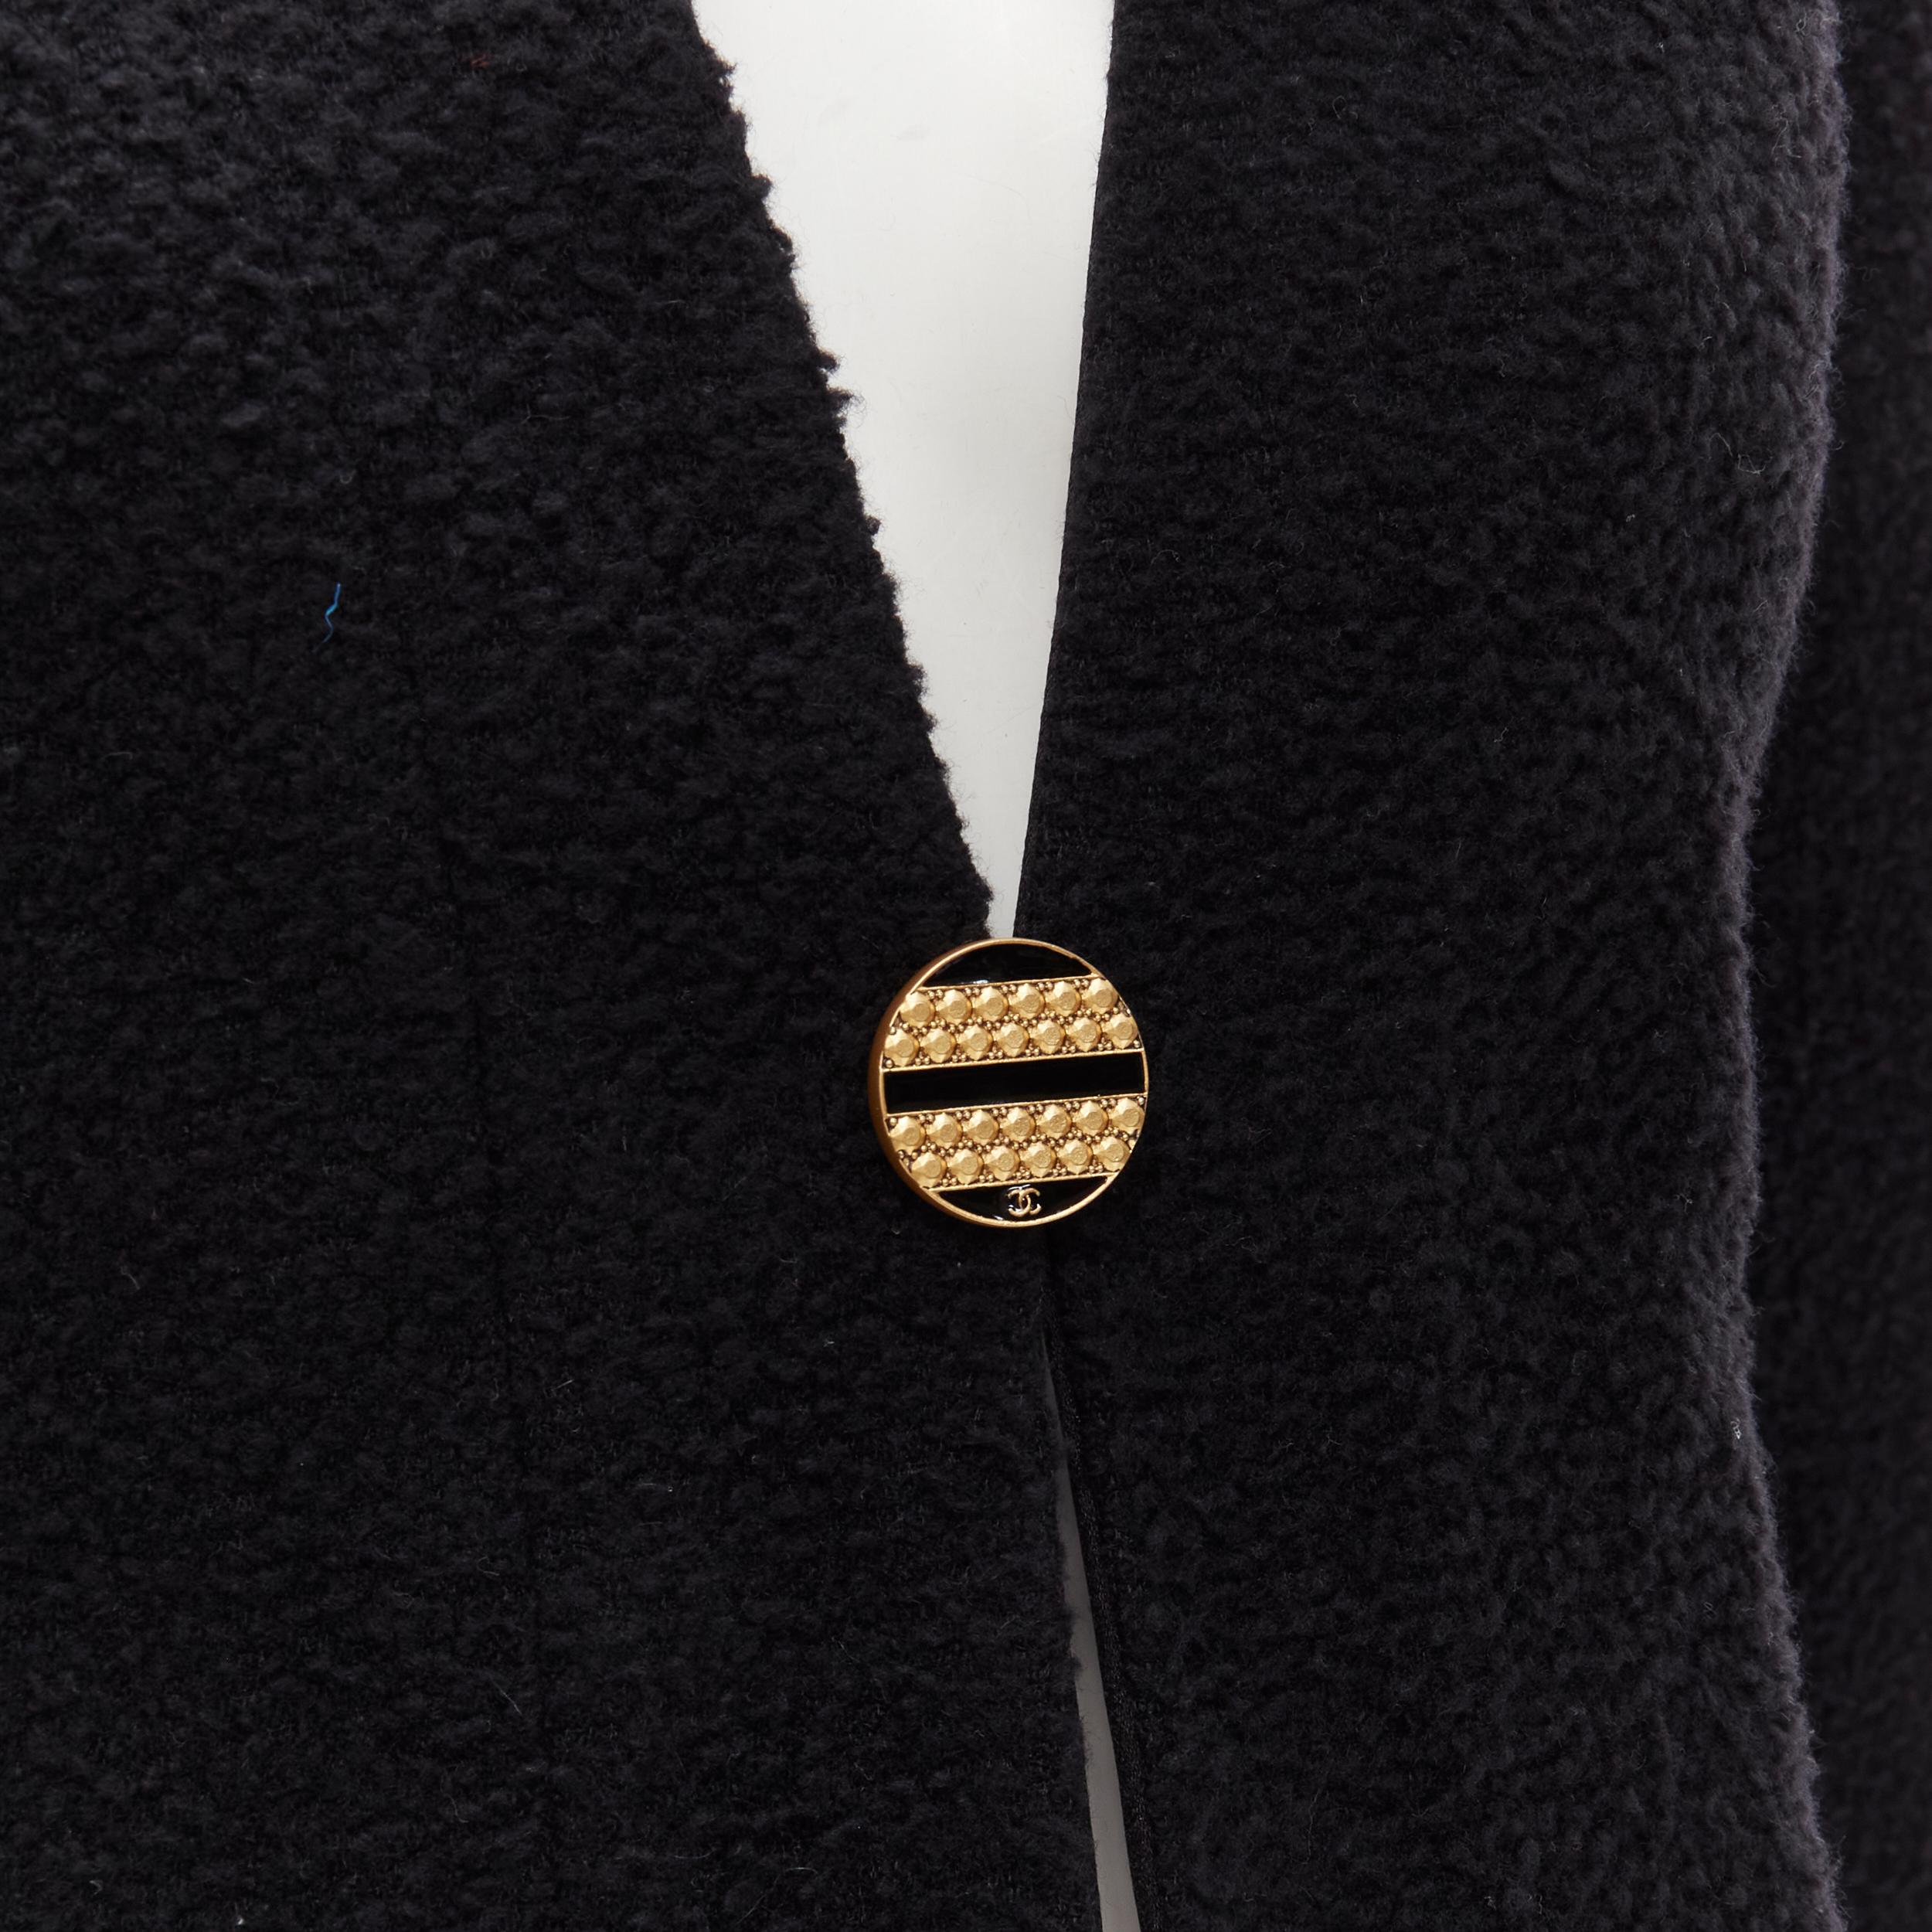 new CHANEL 19A black wool boucle gold round shoulder cocoon jacket FR38 M
Brand: Chanel
Material: Wool
Color: Black
Pattern: Solid
Closure: Button
Extra Detail: Wool-silk boucle. Rounded dropped shoulder seam. Collarless. Gold and black enamel CC